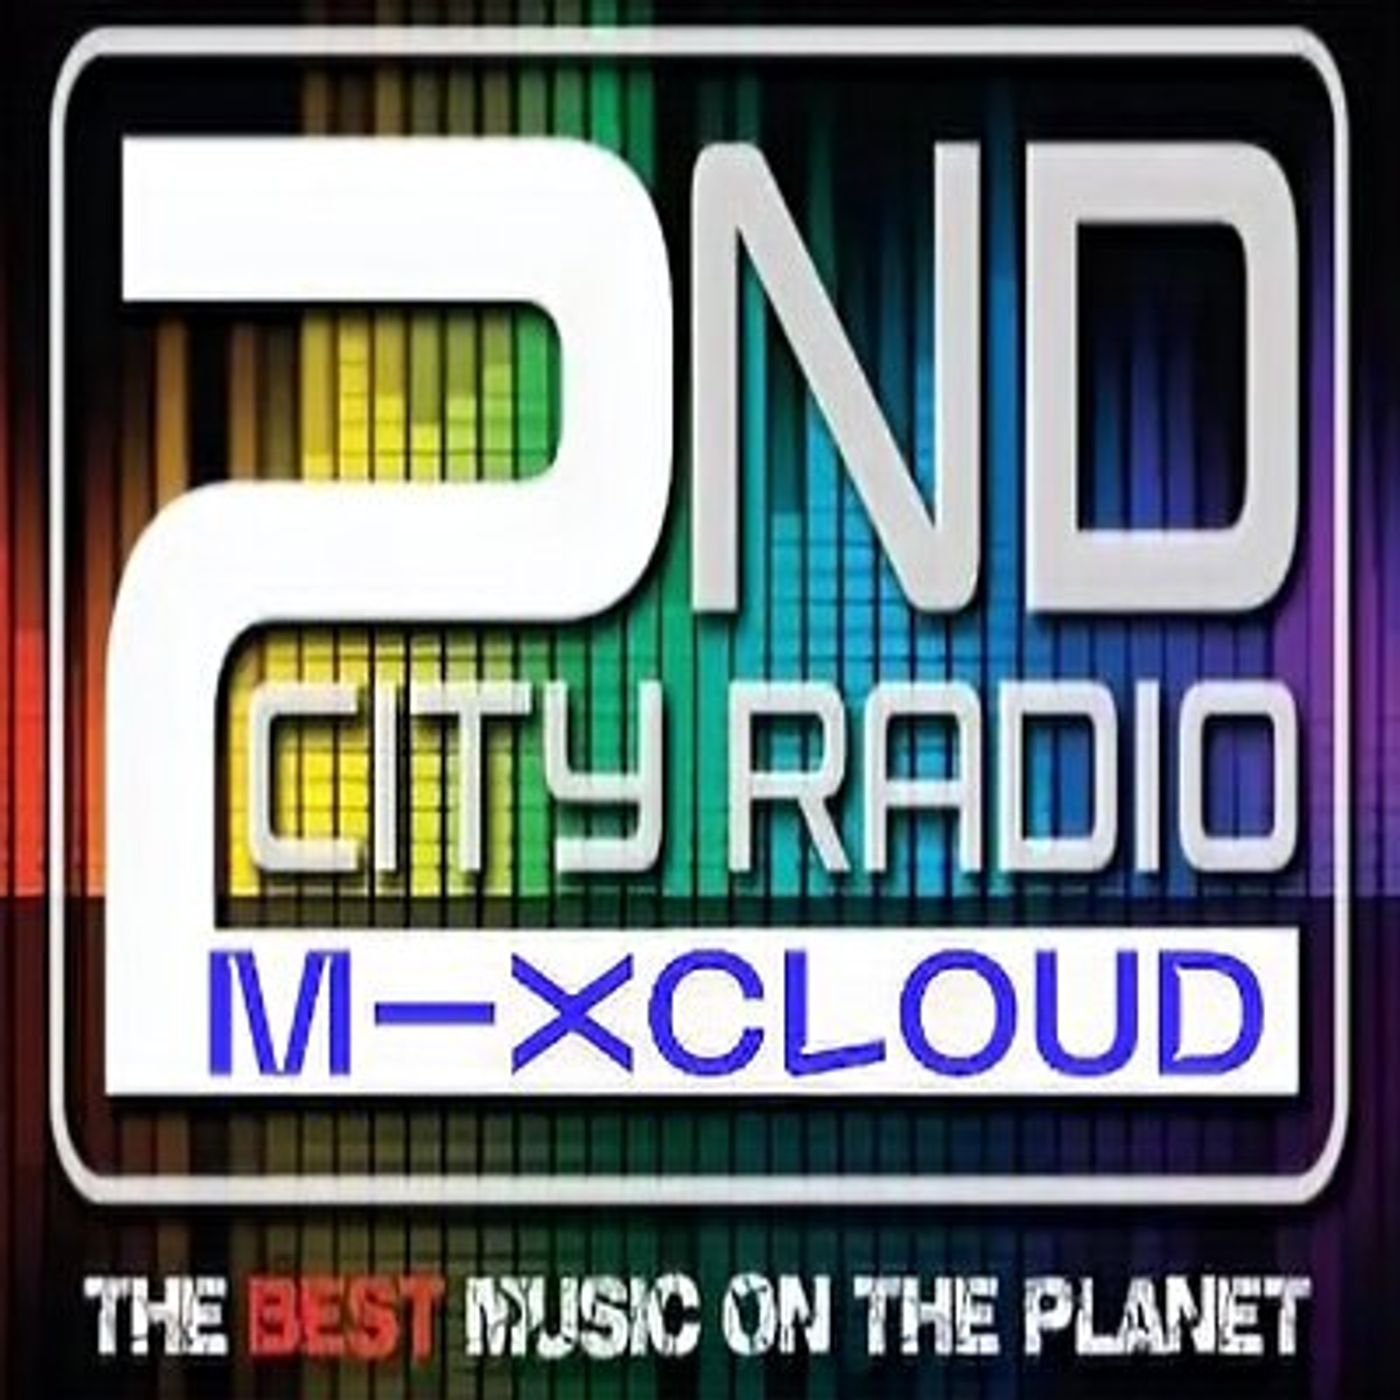 Thursday the 30th of December 2021 with Classic Chat on 2ndcity Radio